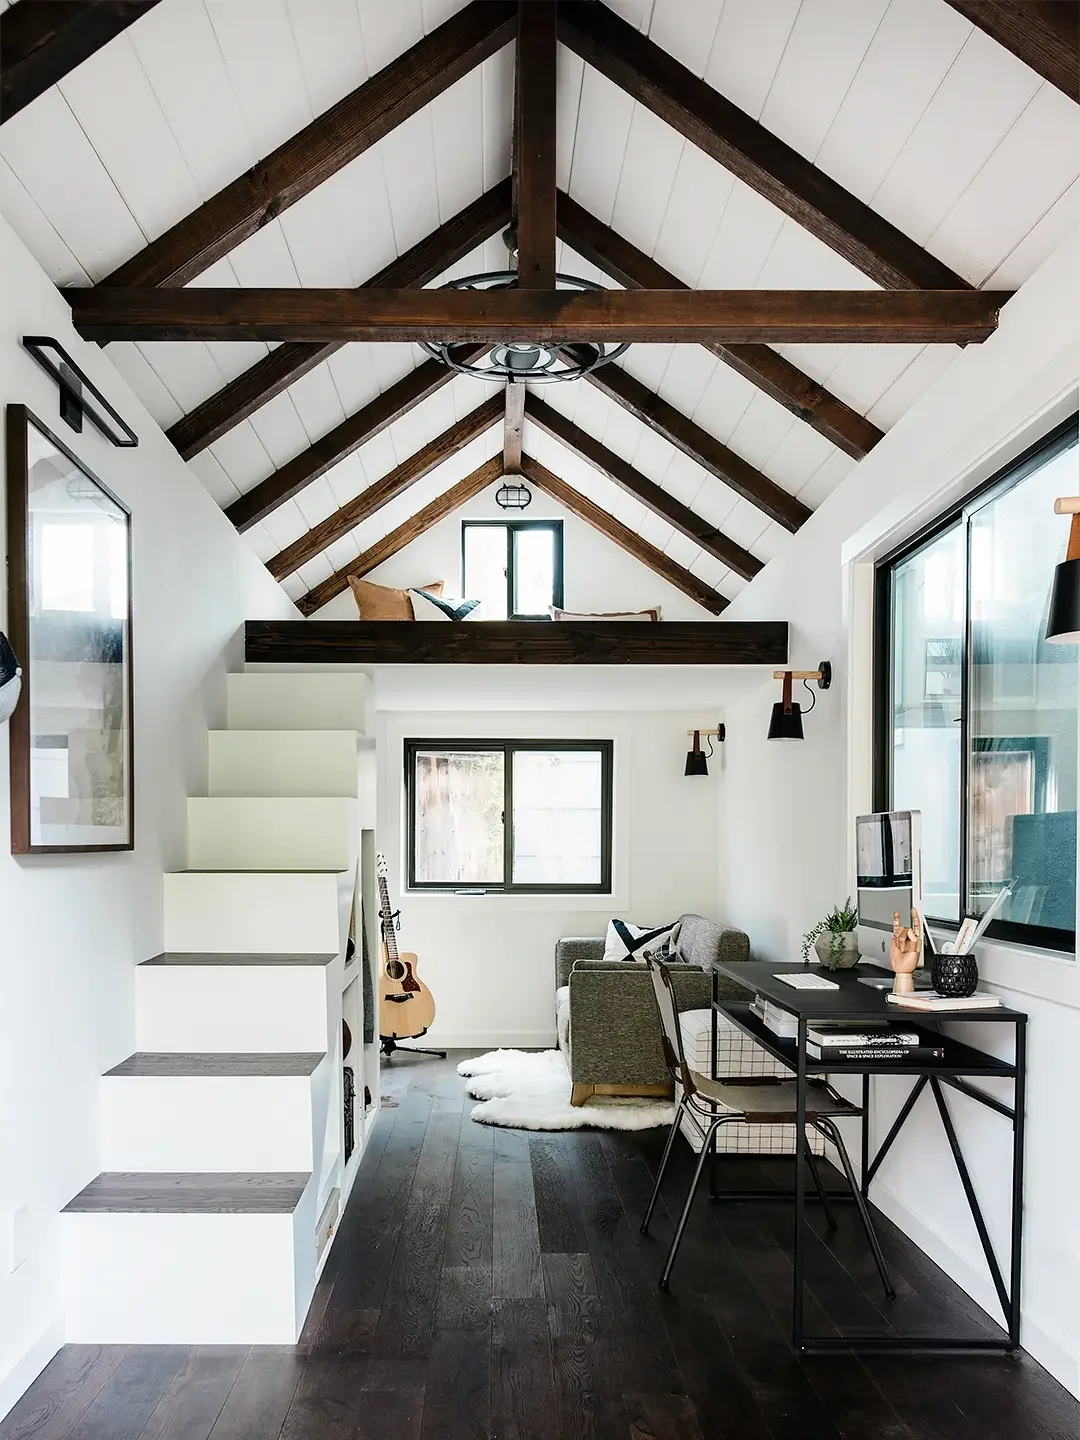 Teen bunk house with lofted wood ceilings and white walls. 